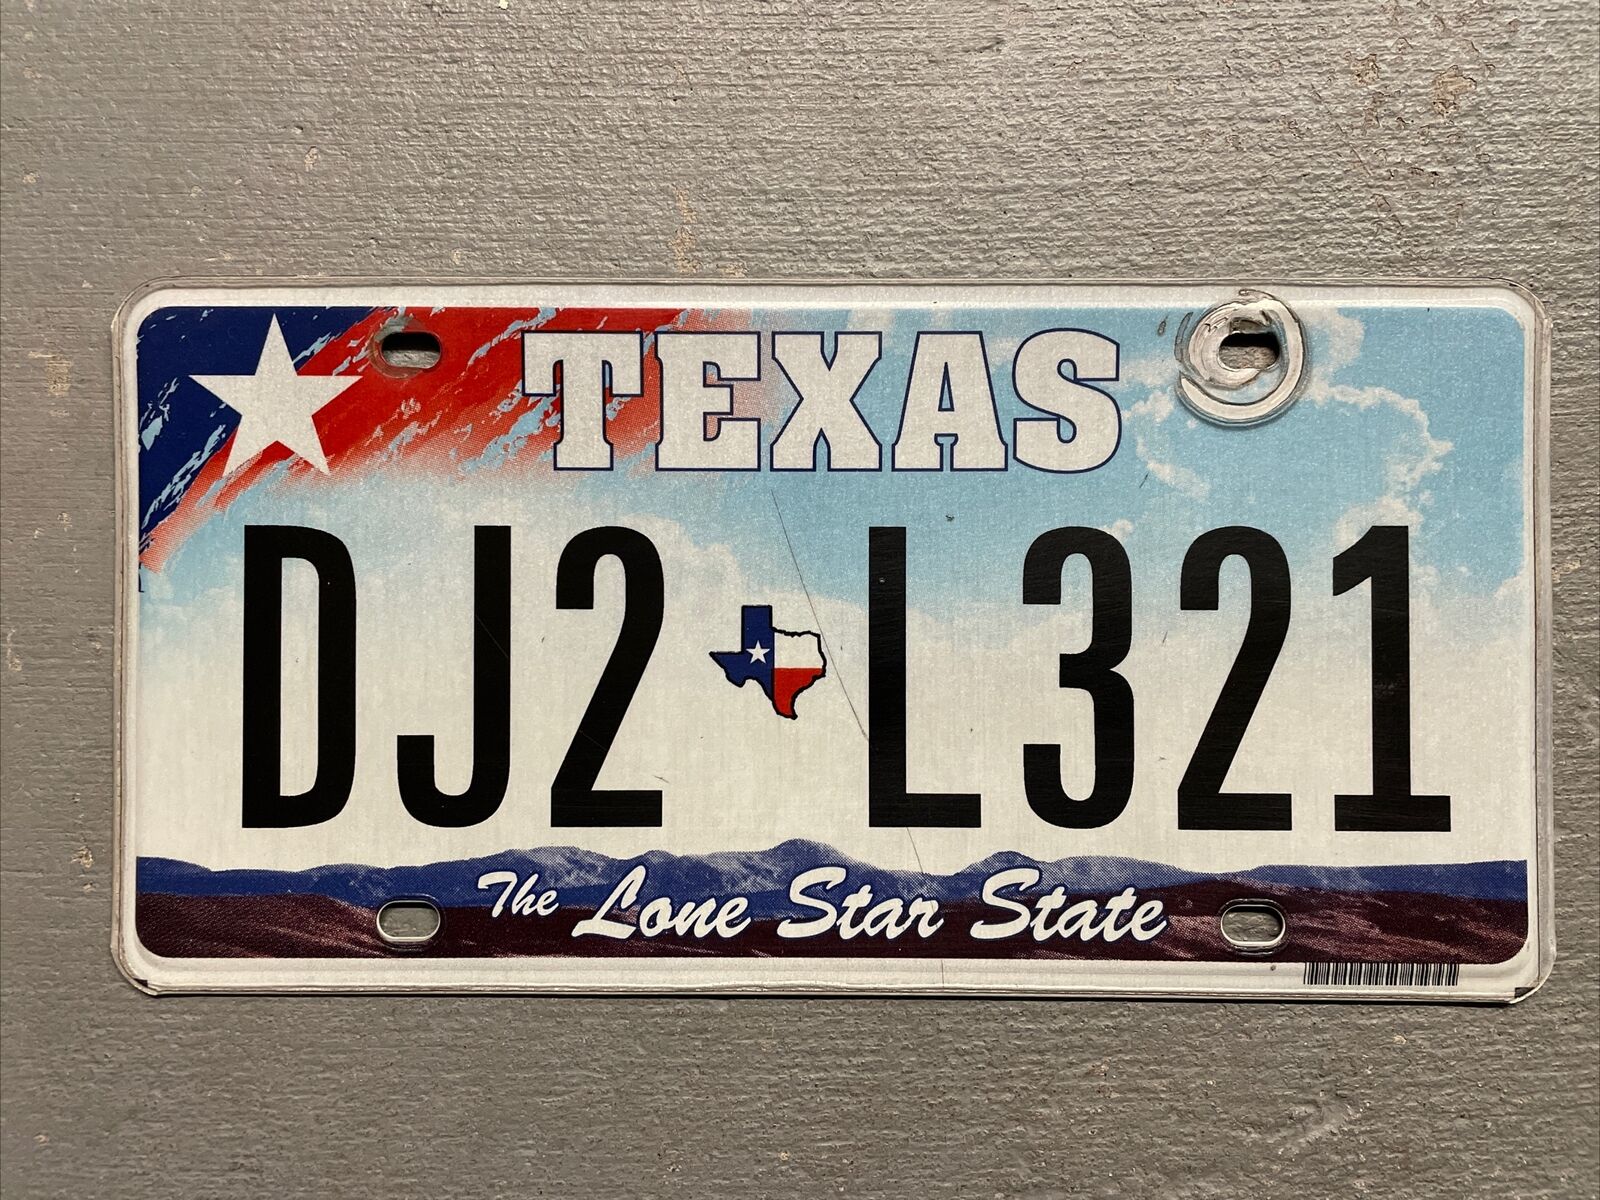 VINTAGE TEXAS LICENSE PLATE THE LONE STAR STATE RED/WHITE/BLUE DJ2-L321 COOL😎